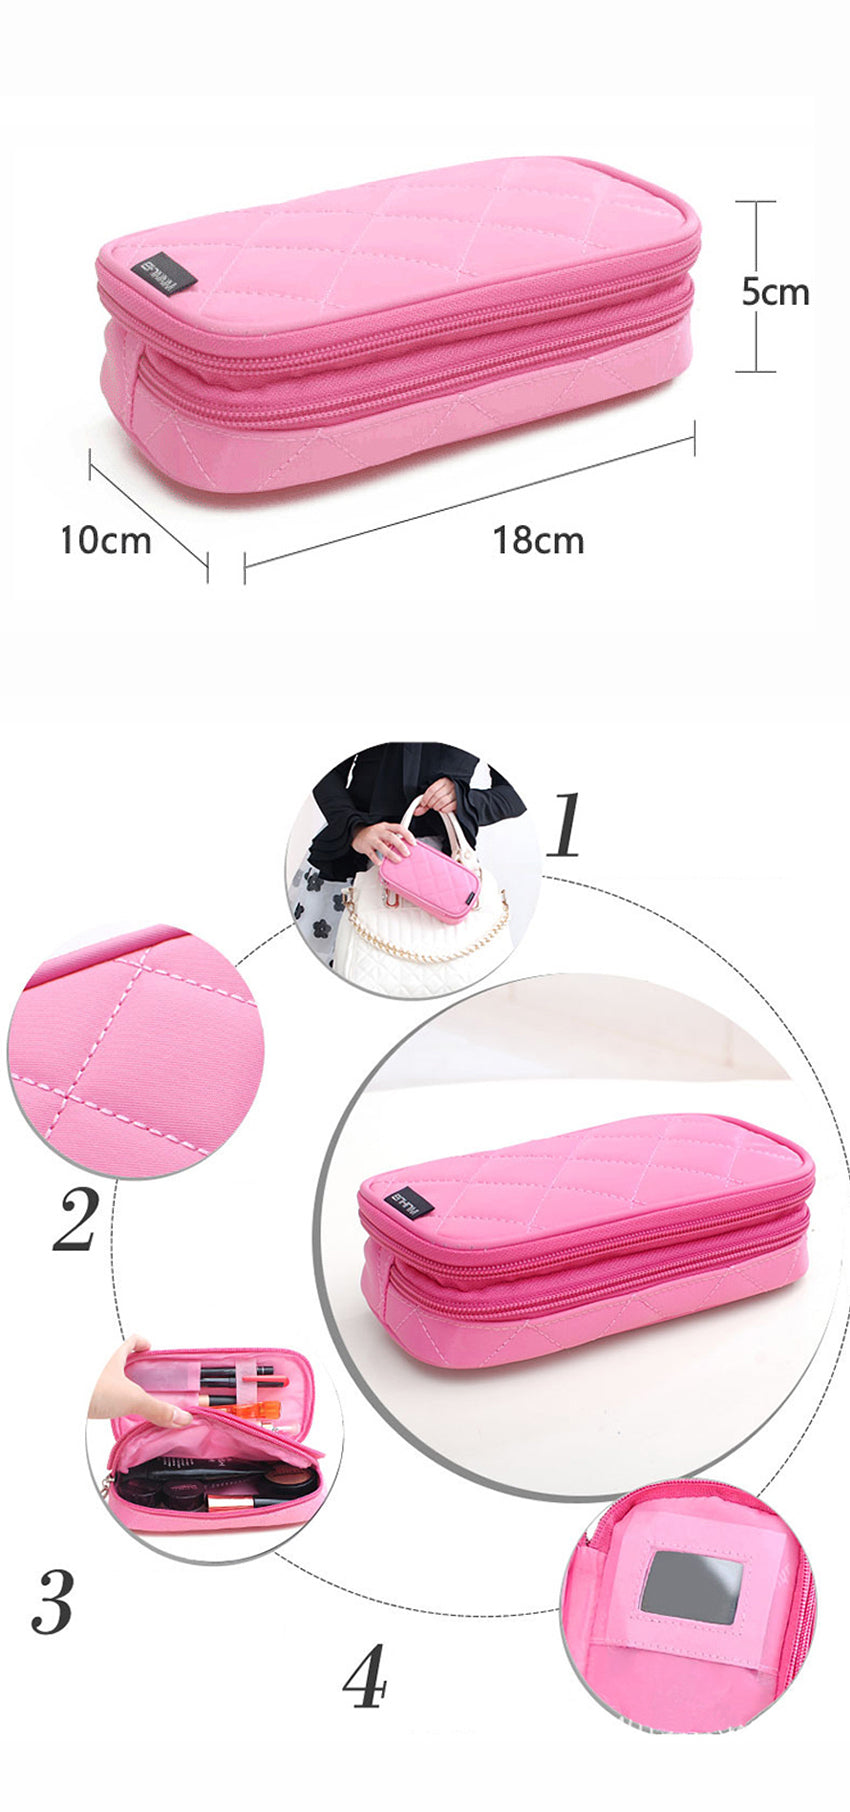 Cyflymder LLuxury Designer Women's Toiletry Cosmetic Bag Double Waterproof Beautician Make Up Bags Travel Essential Organizer Beauty Case